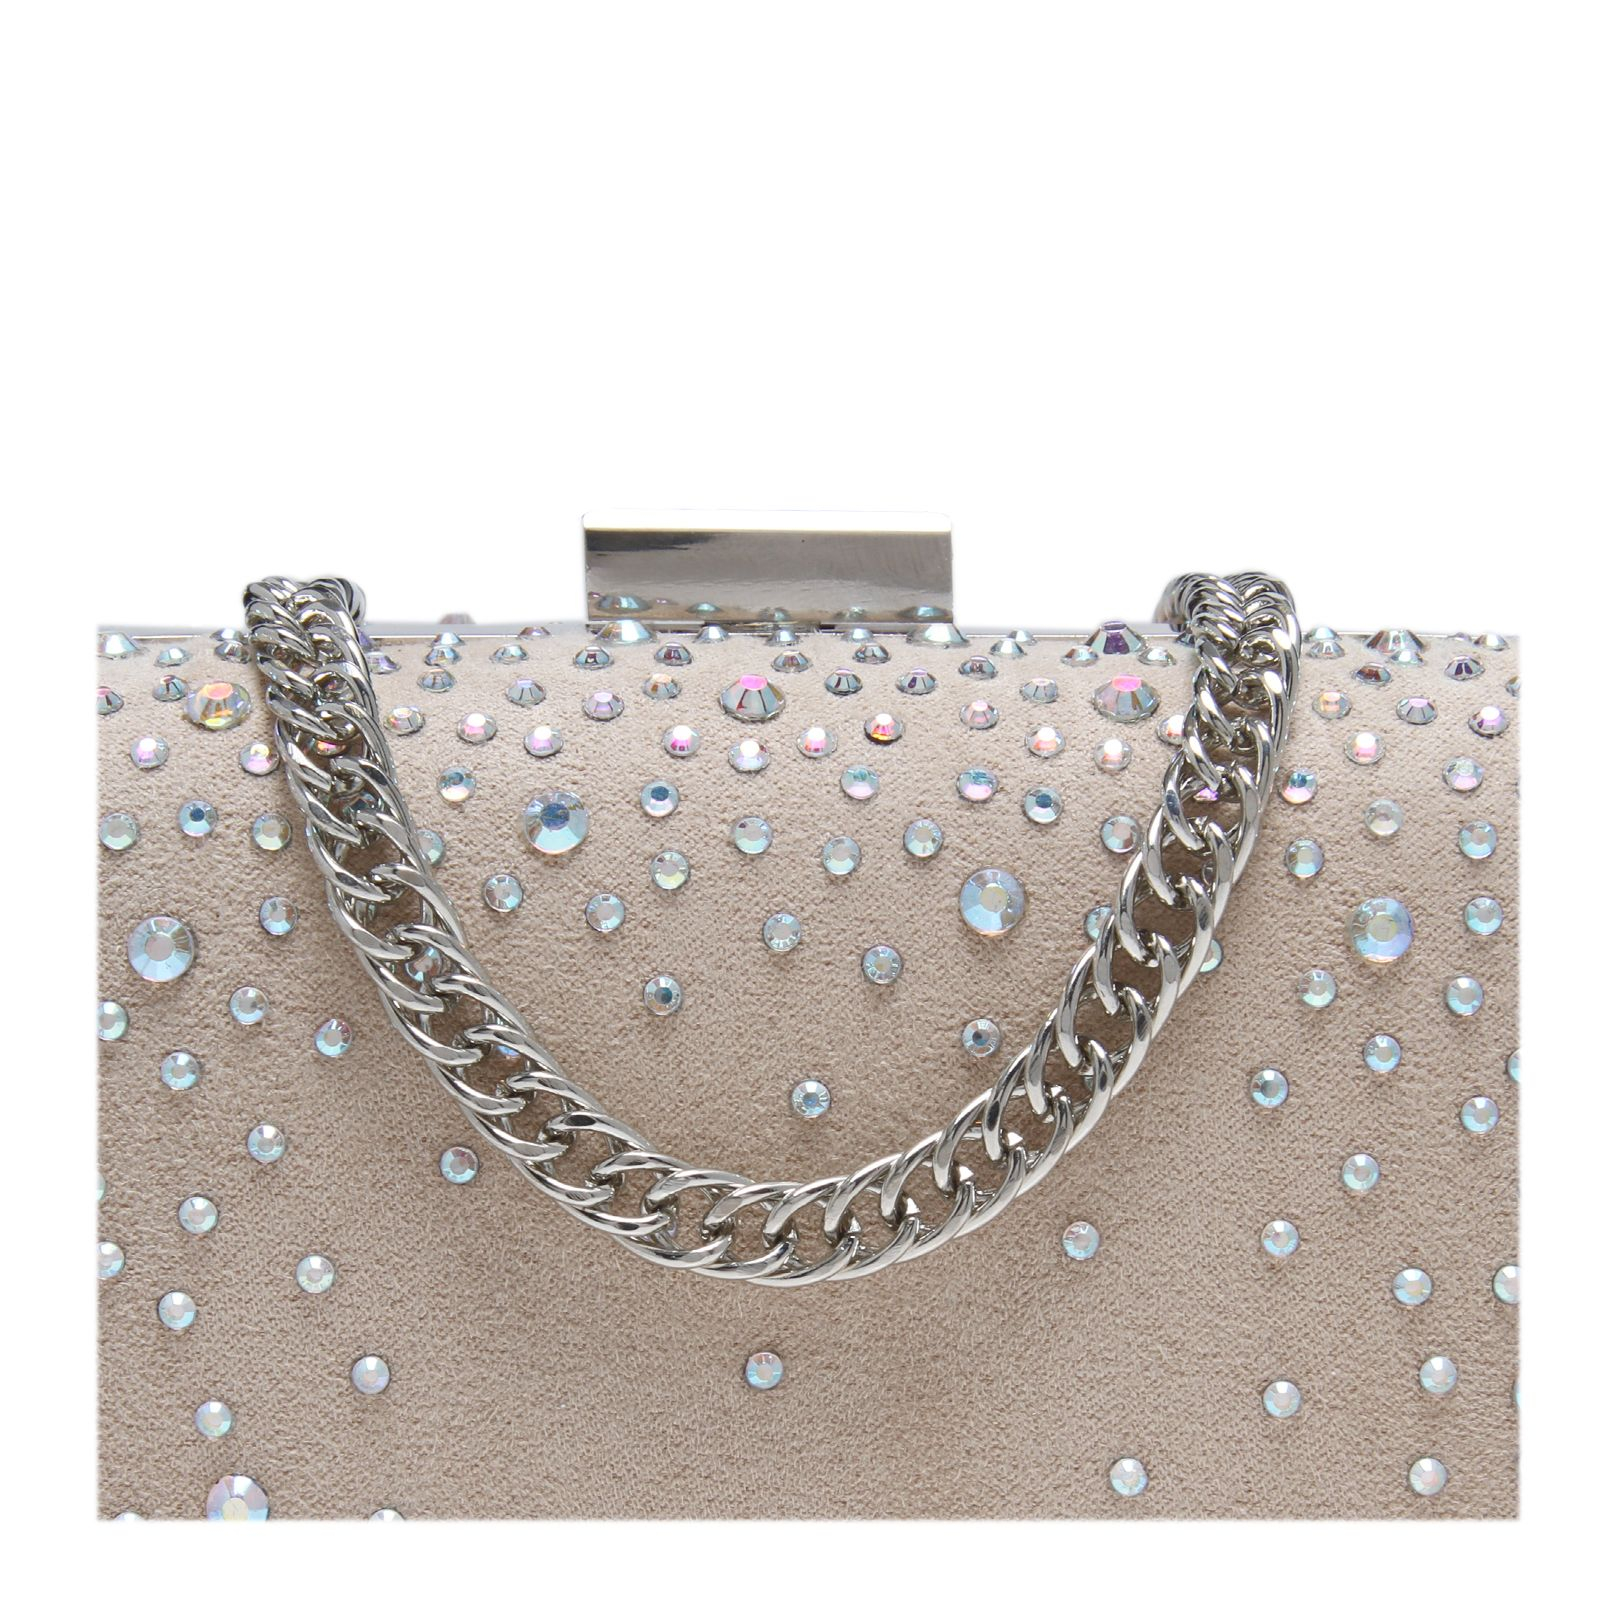 Miss Kg Hetty Sparkle Box Clutch Bag in Nude (Natural) - Lyst